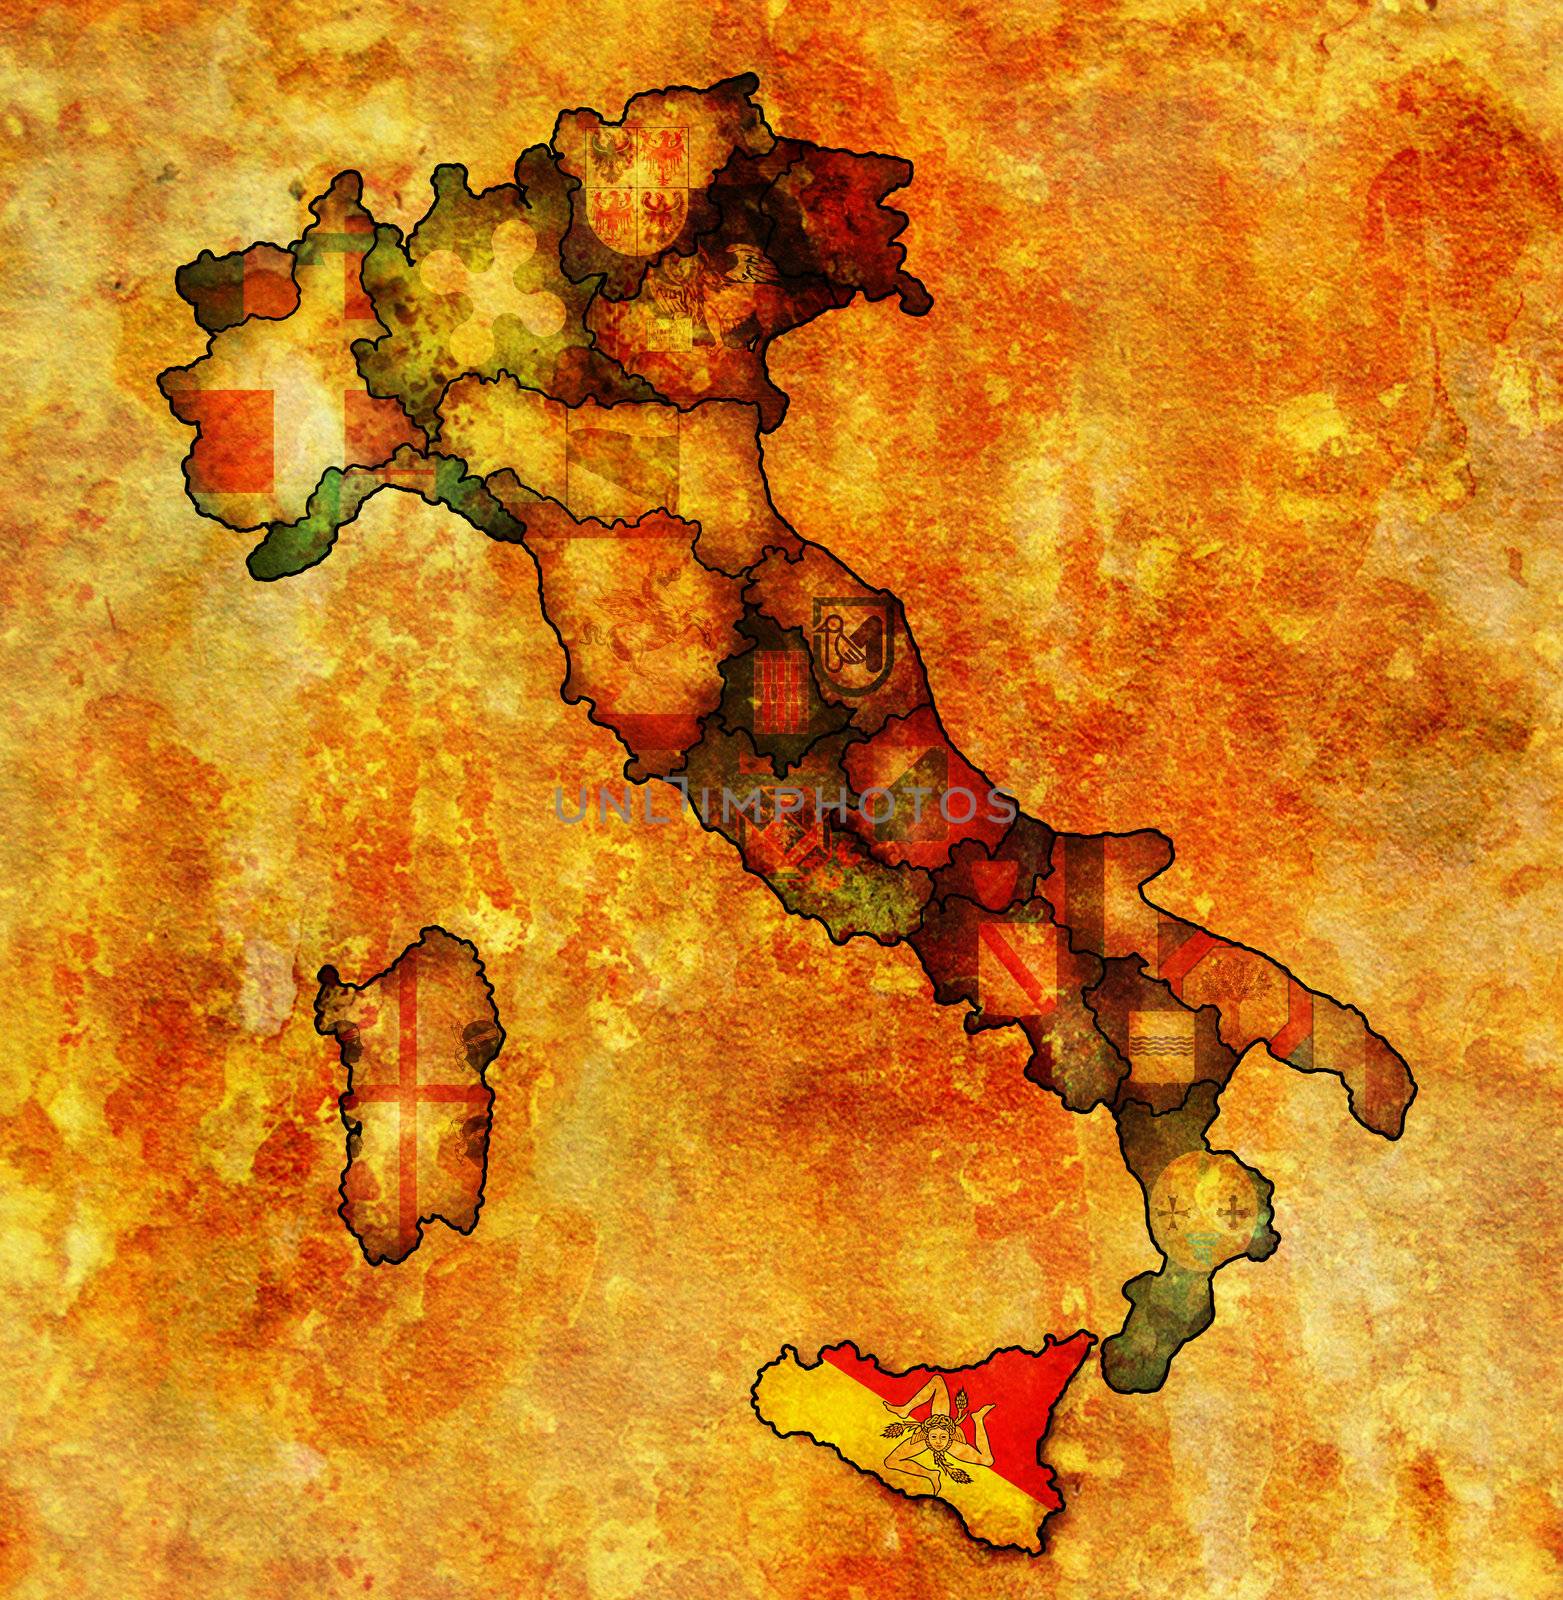 sicily region on administration map of italy with flags